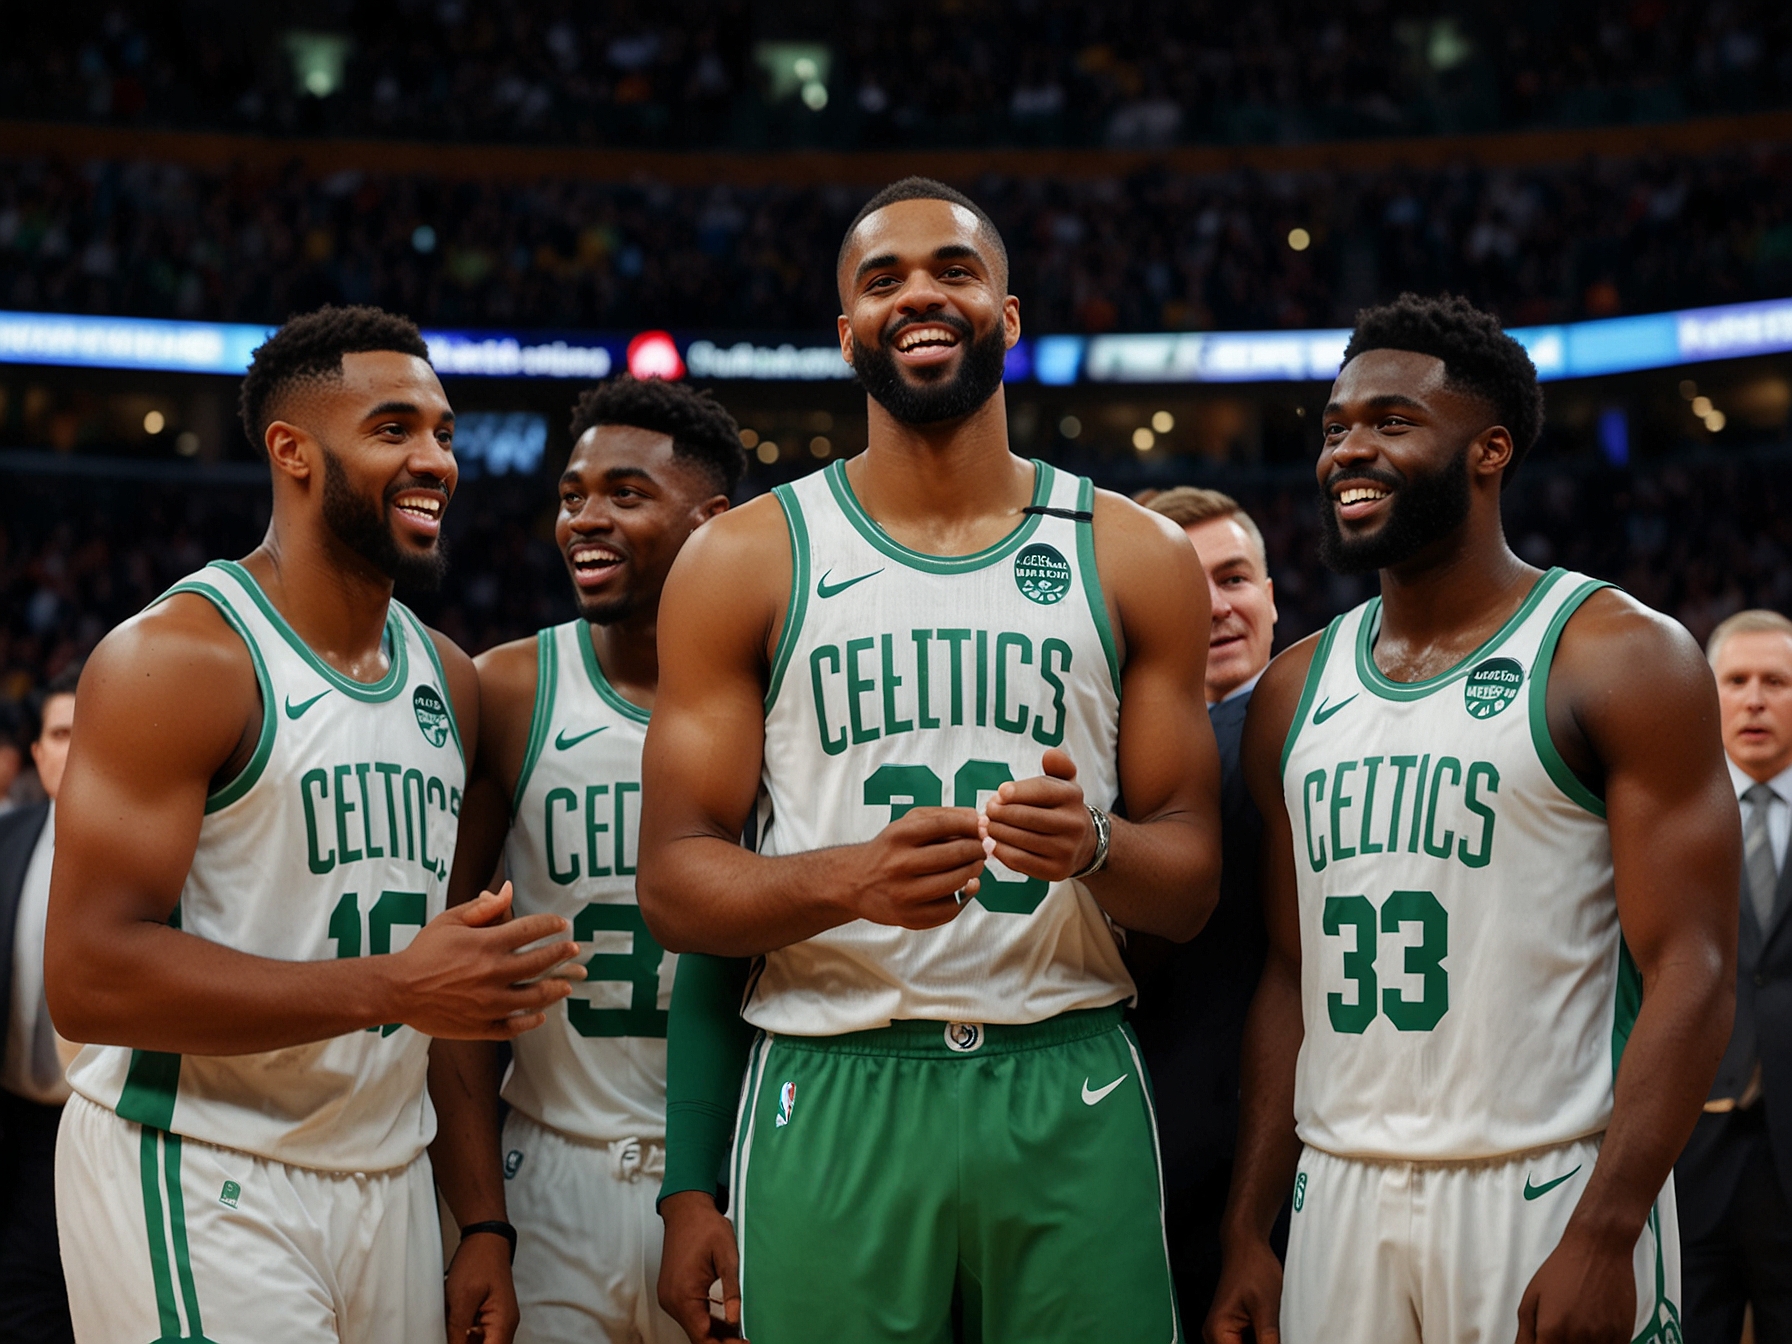 The Boston Celtics' team, including Coach Ime Udoka and Jaylen Brown, revels in their historic victory at the TD Garden, solidifying their place in NBA history.